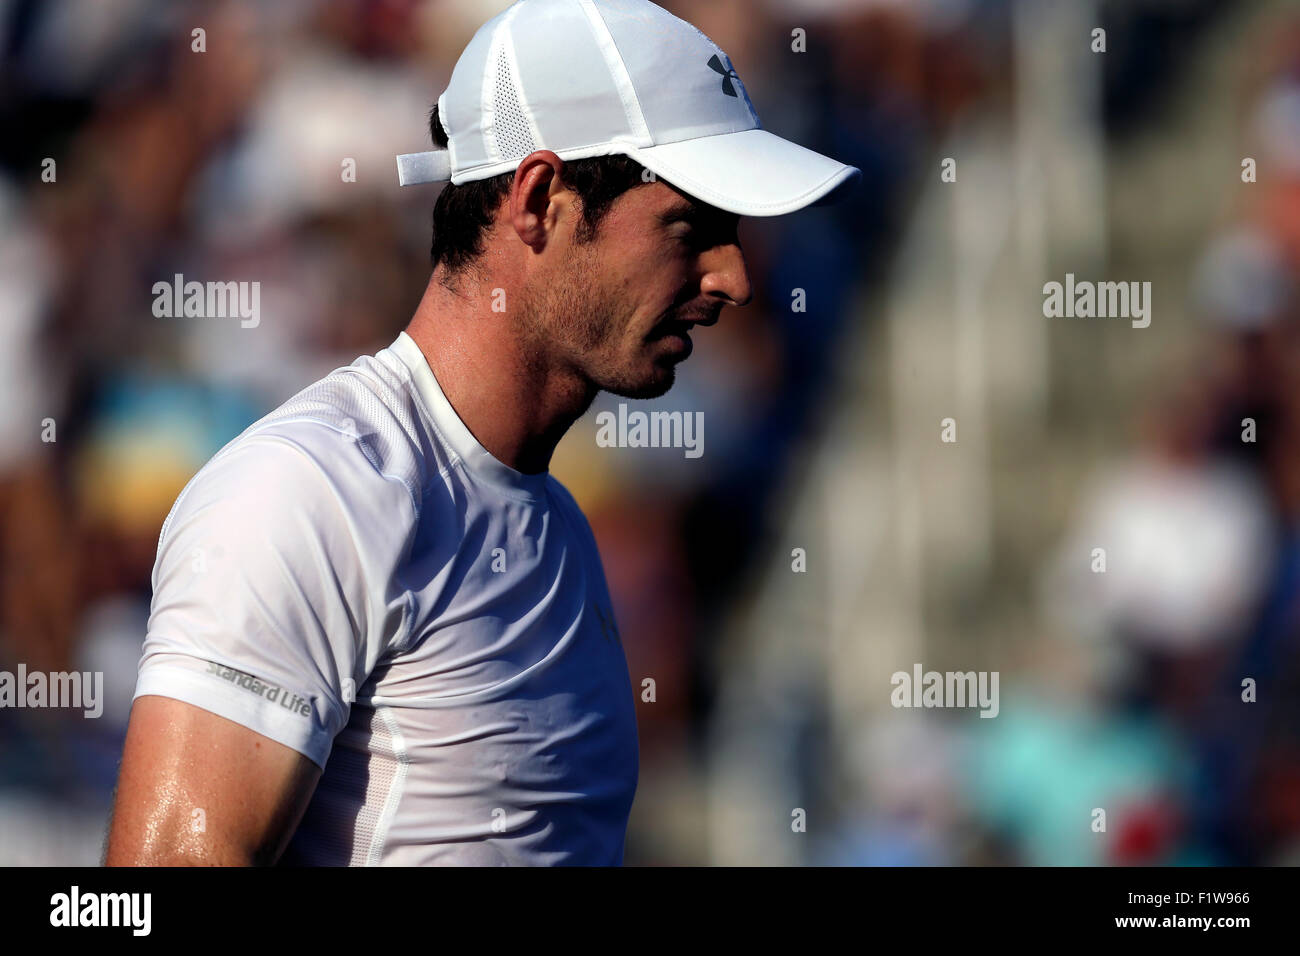 New York, USA. 7th September, 2015. Andy Murray of Great Britain during his 4th round match against Kevin Anderson of South Africa at the U.S. Open in Flushing Meadows, New York on September 7th, 2015.   Anderson won the match in four sets. Credit:  Adam Stoltman/Alamy Live News Stock Photo